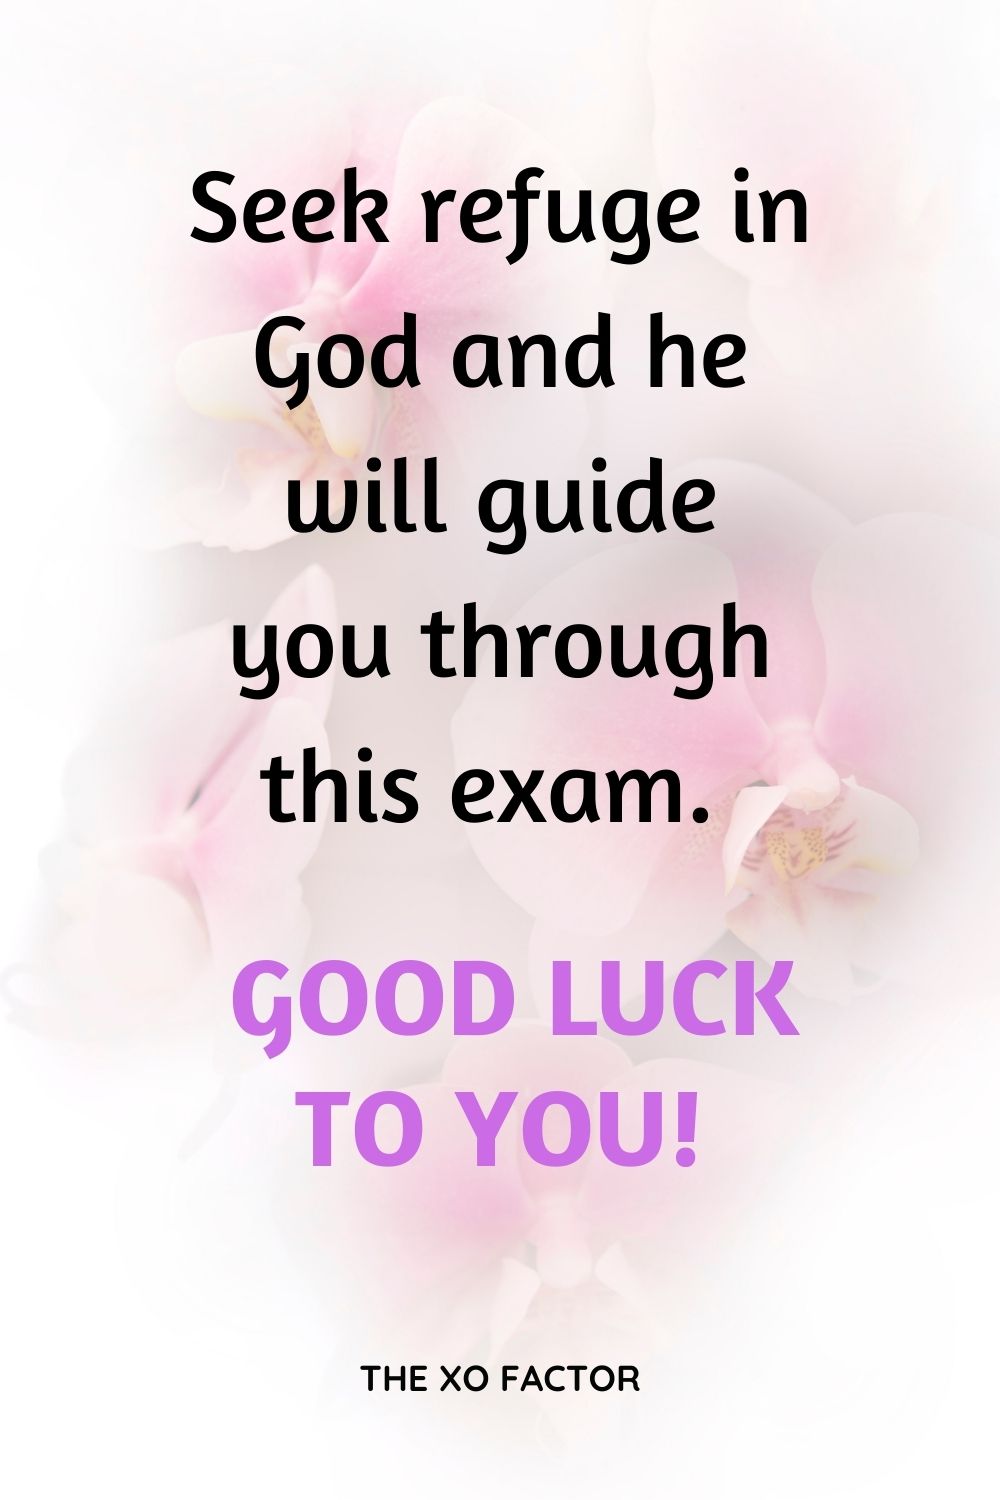 Seek refuge in God and he will guide you through this exam. Good luck to you!